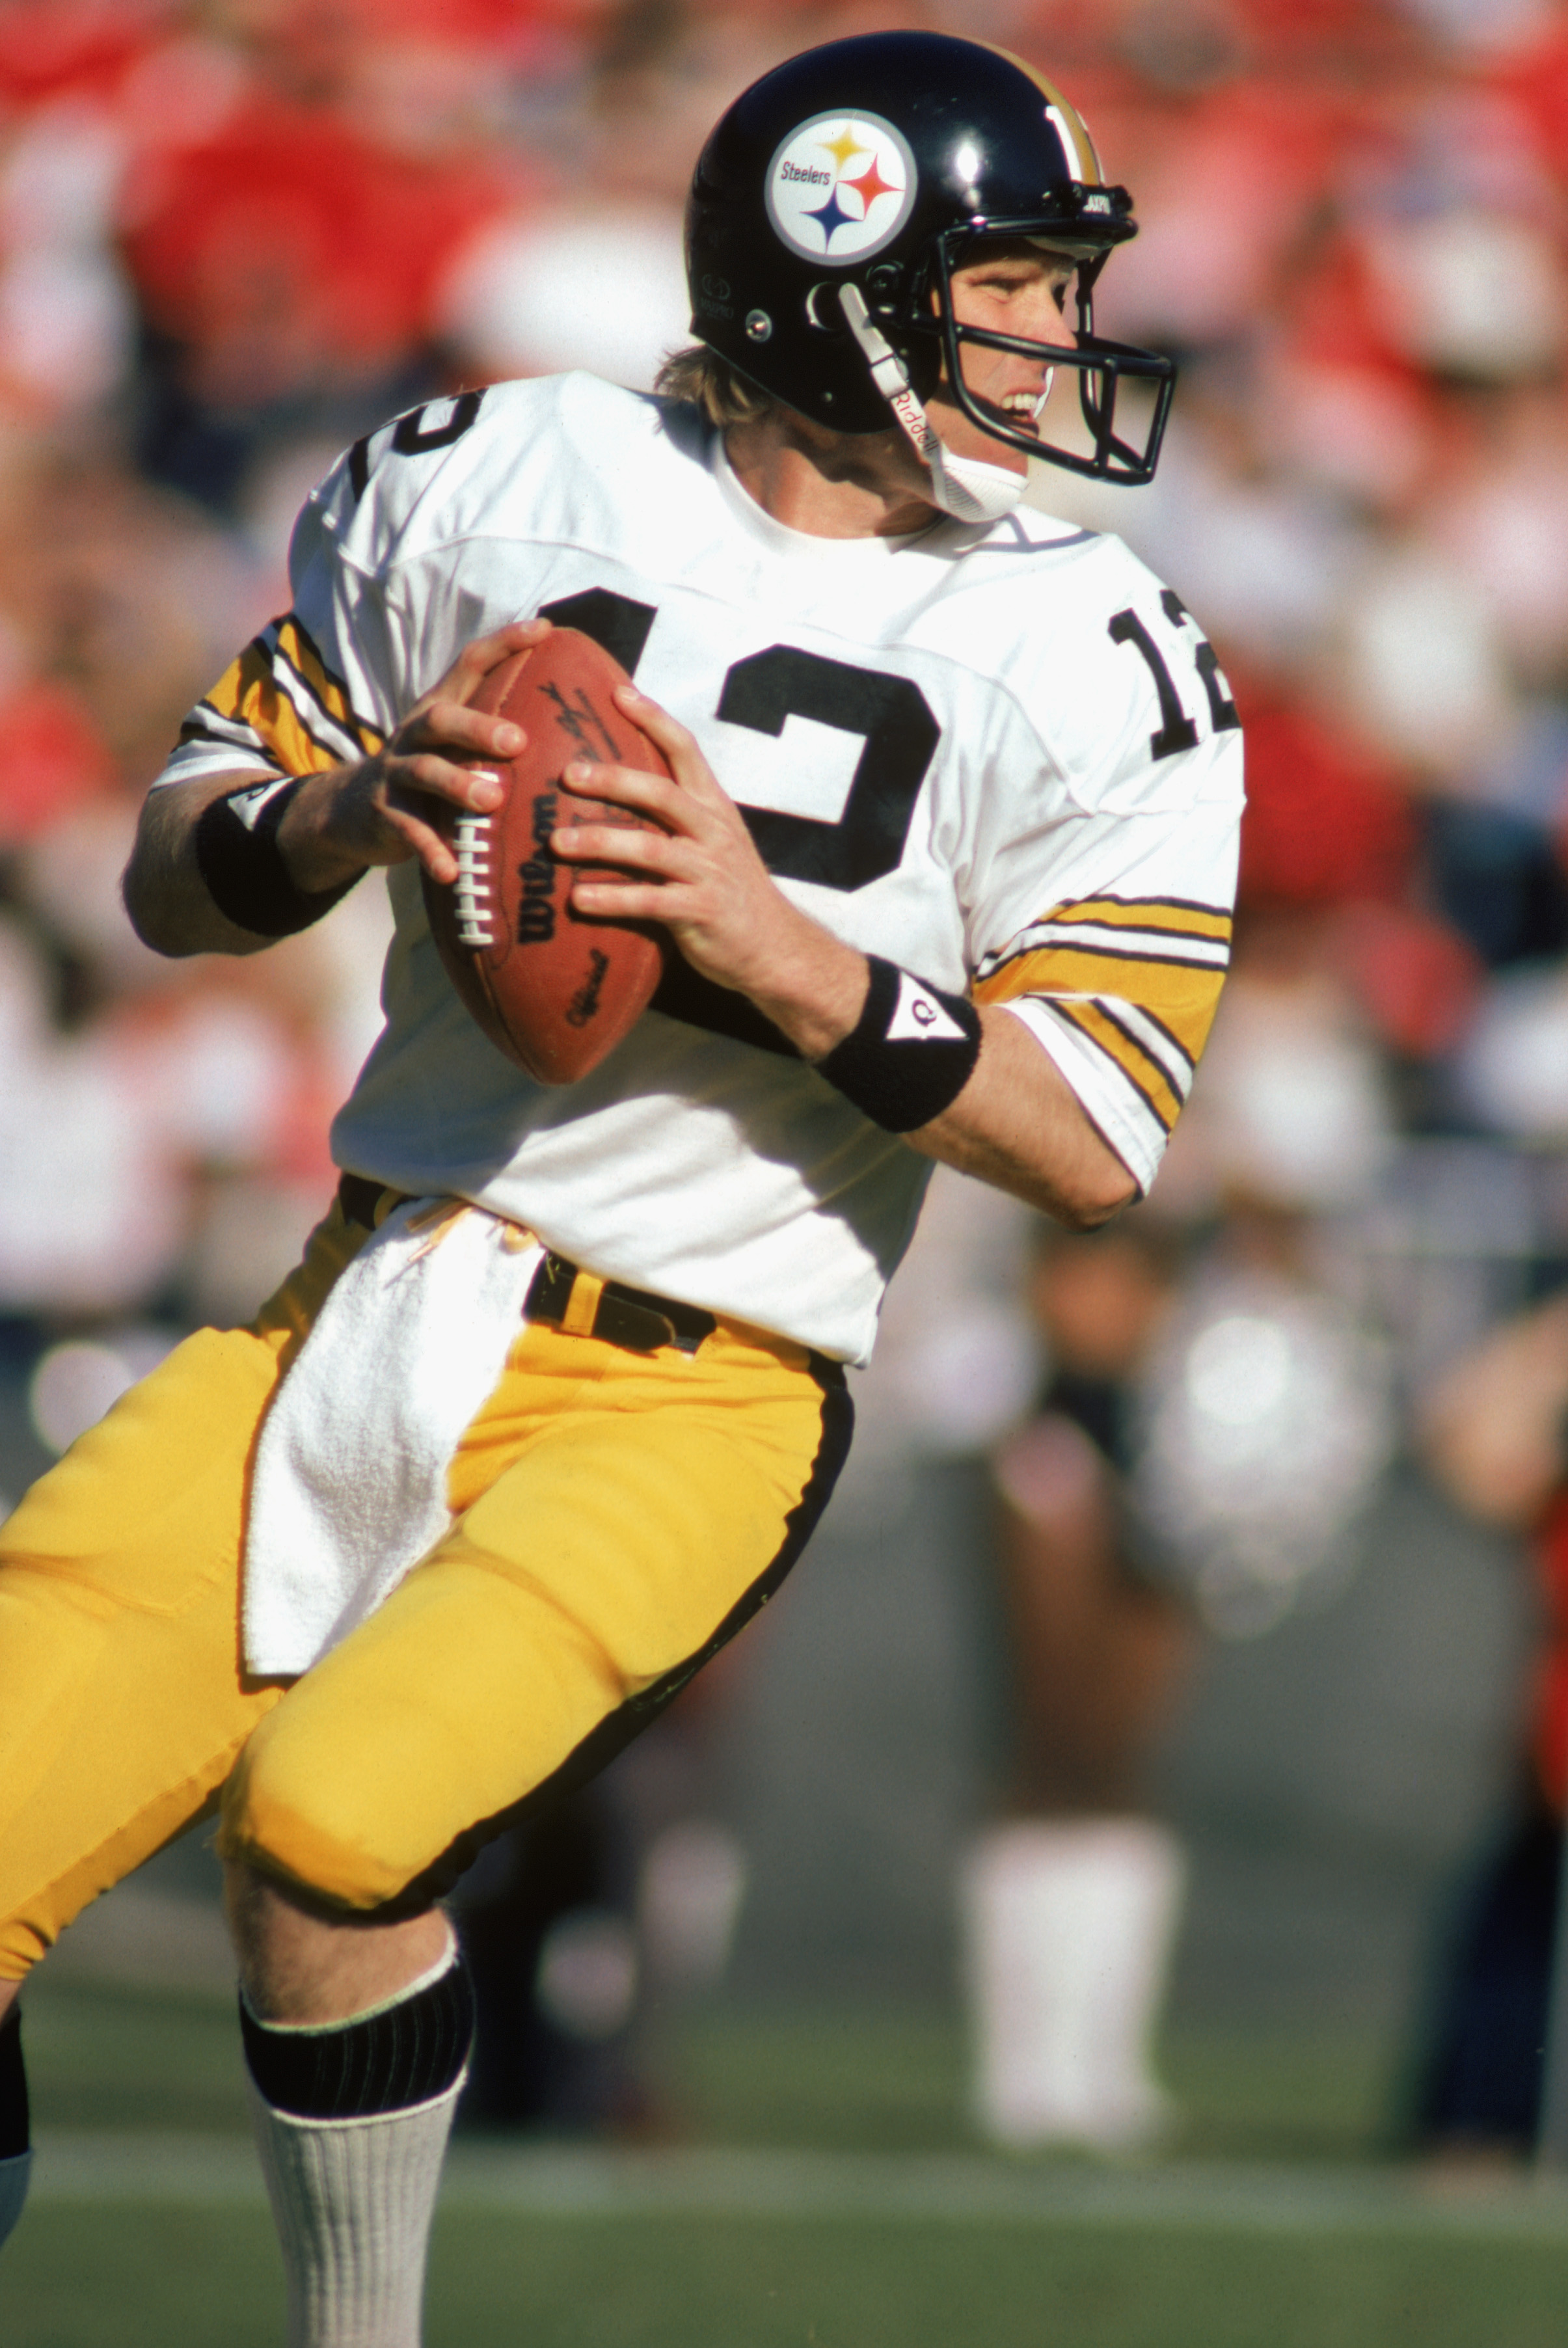 Not in Hall of Fame - 11. Terry Bradshaw